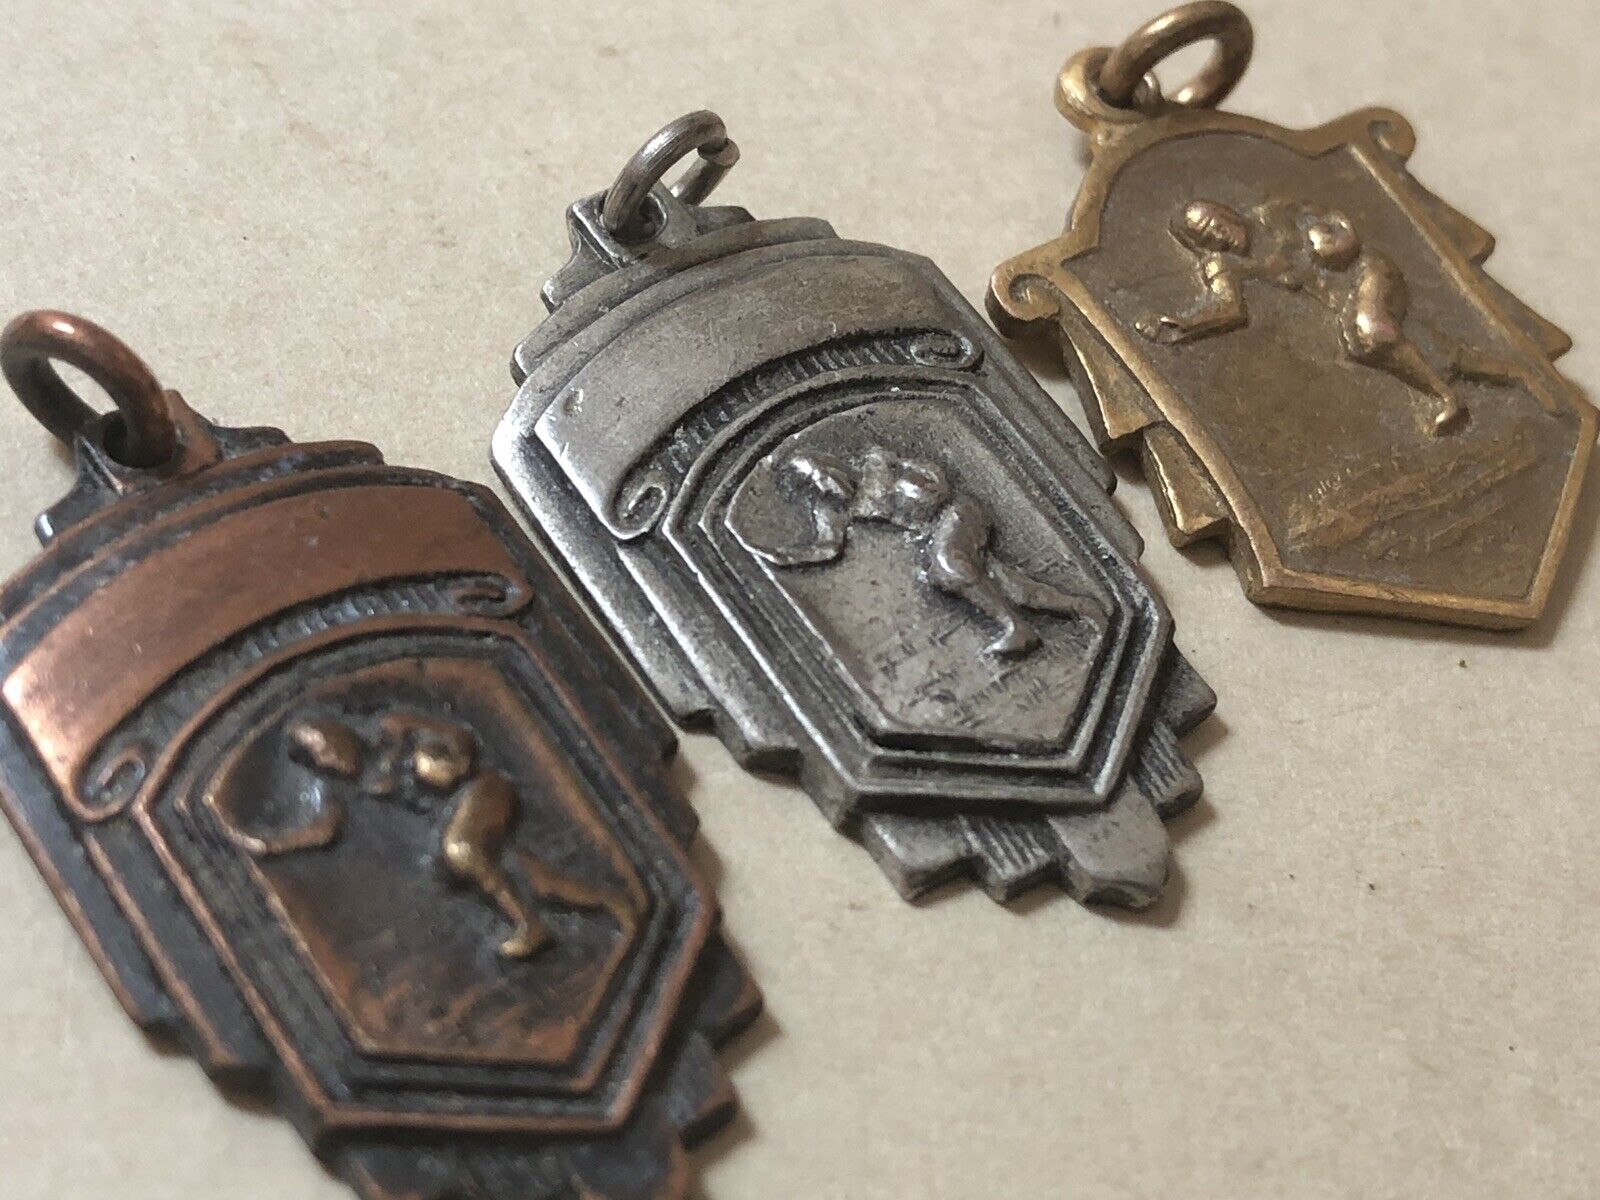 Lot Of 3 Vintage 1940’s American Football Medals - Bronze, Silver & Gold